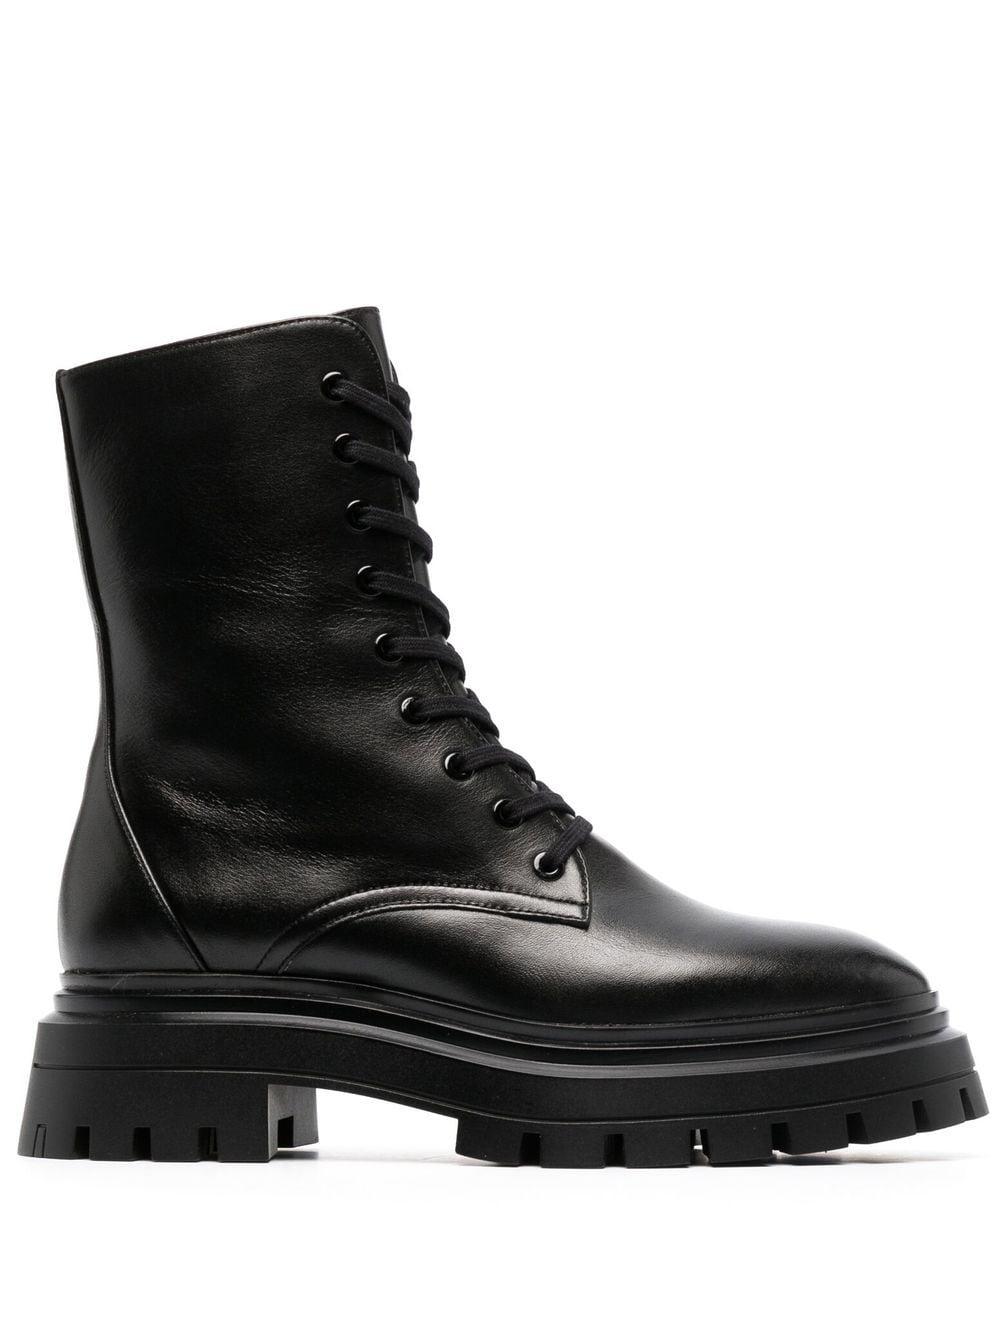 Stuart Weitzman Bedford Leather Lace-up Boots in Black | Lyst